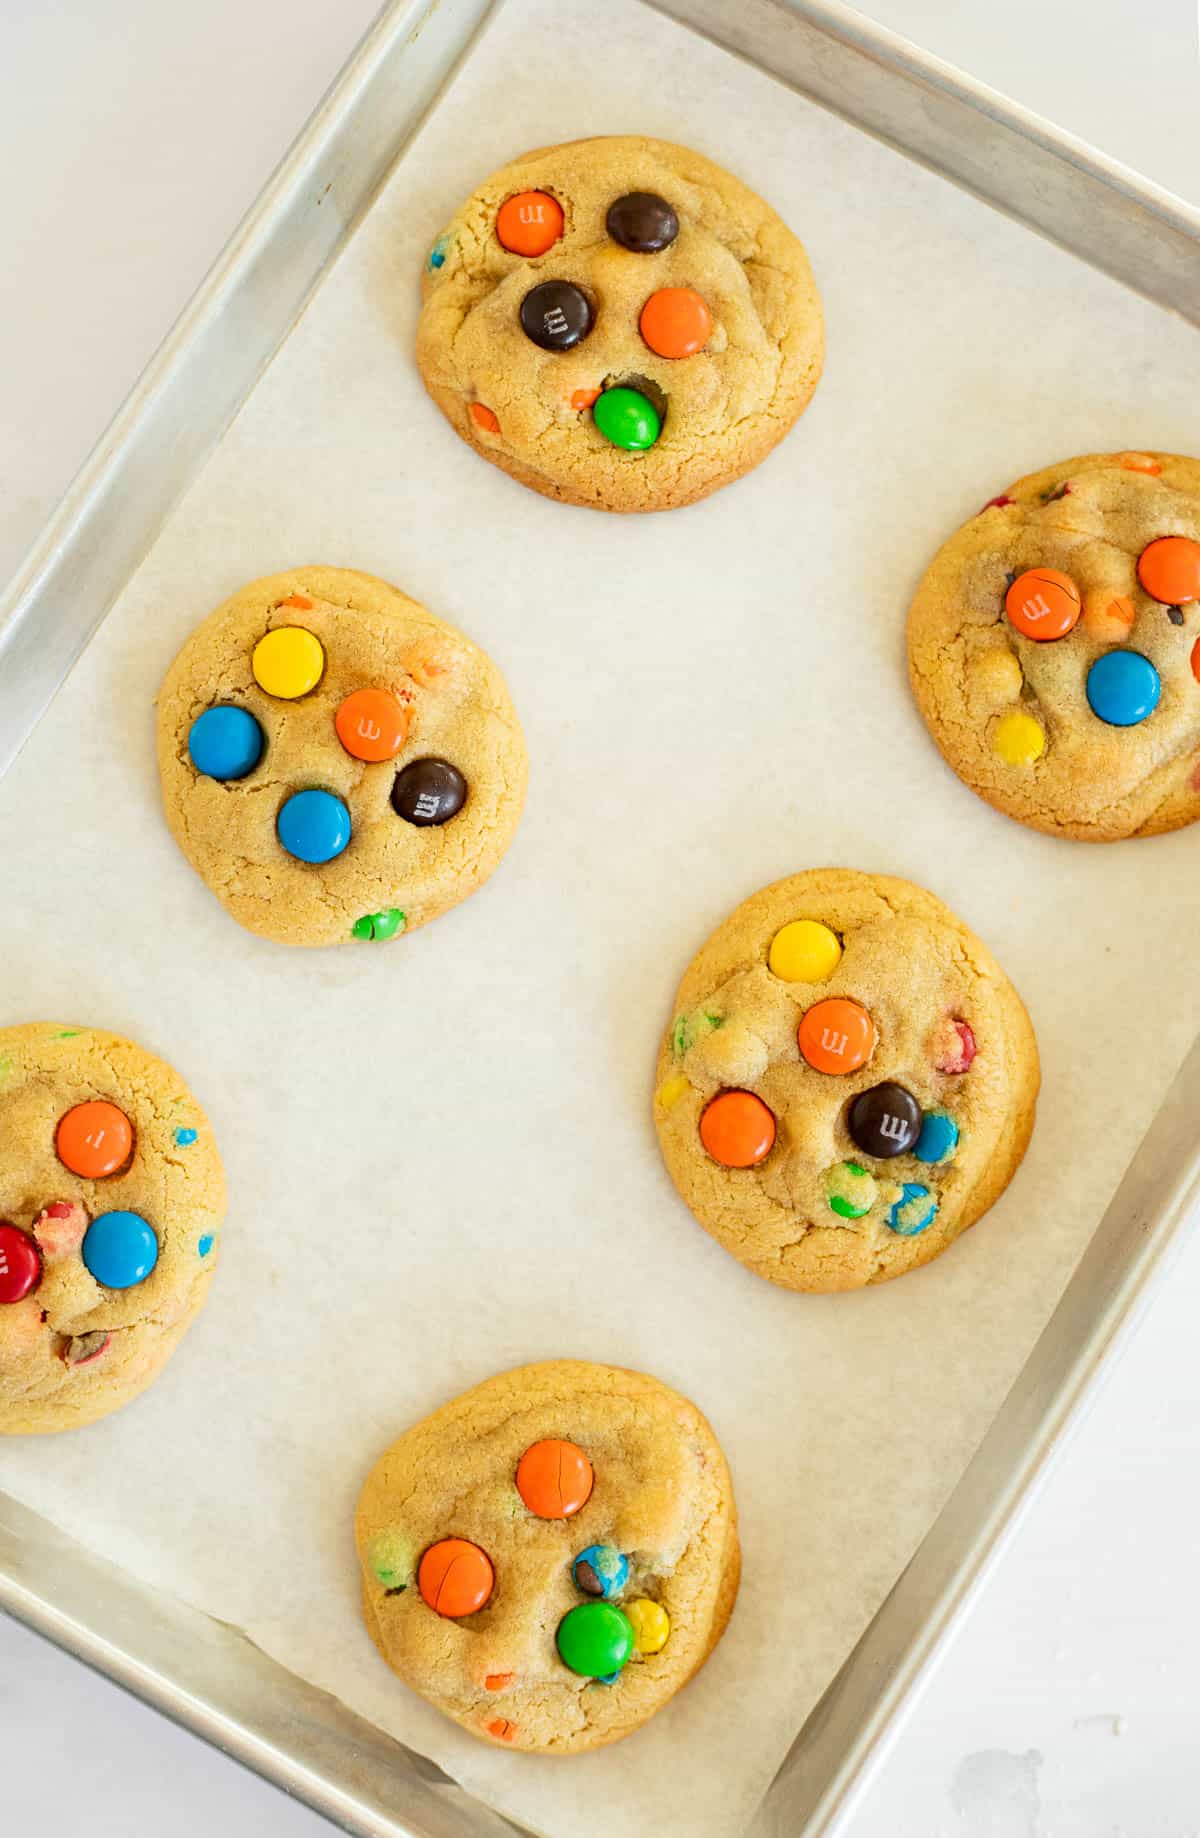 6 M&M cookies baked on a parchment lined baking sheet.